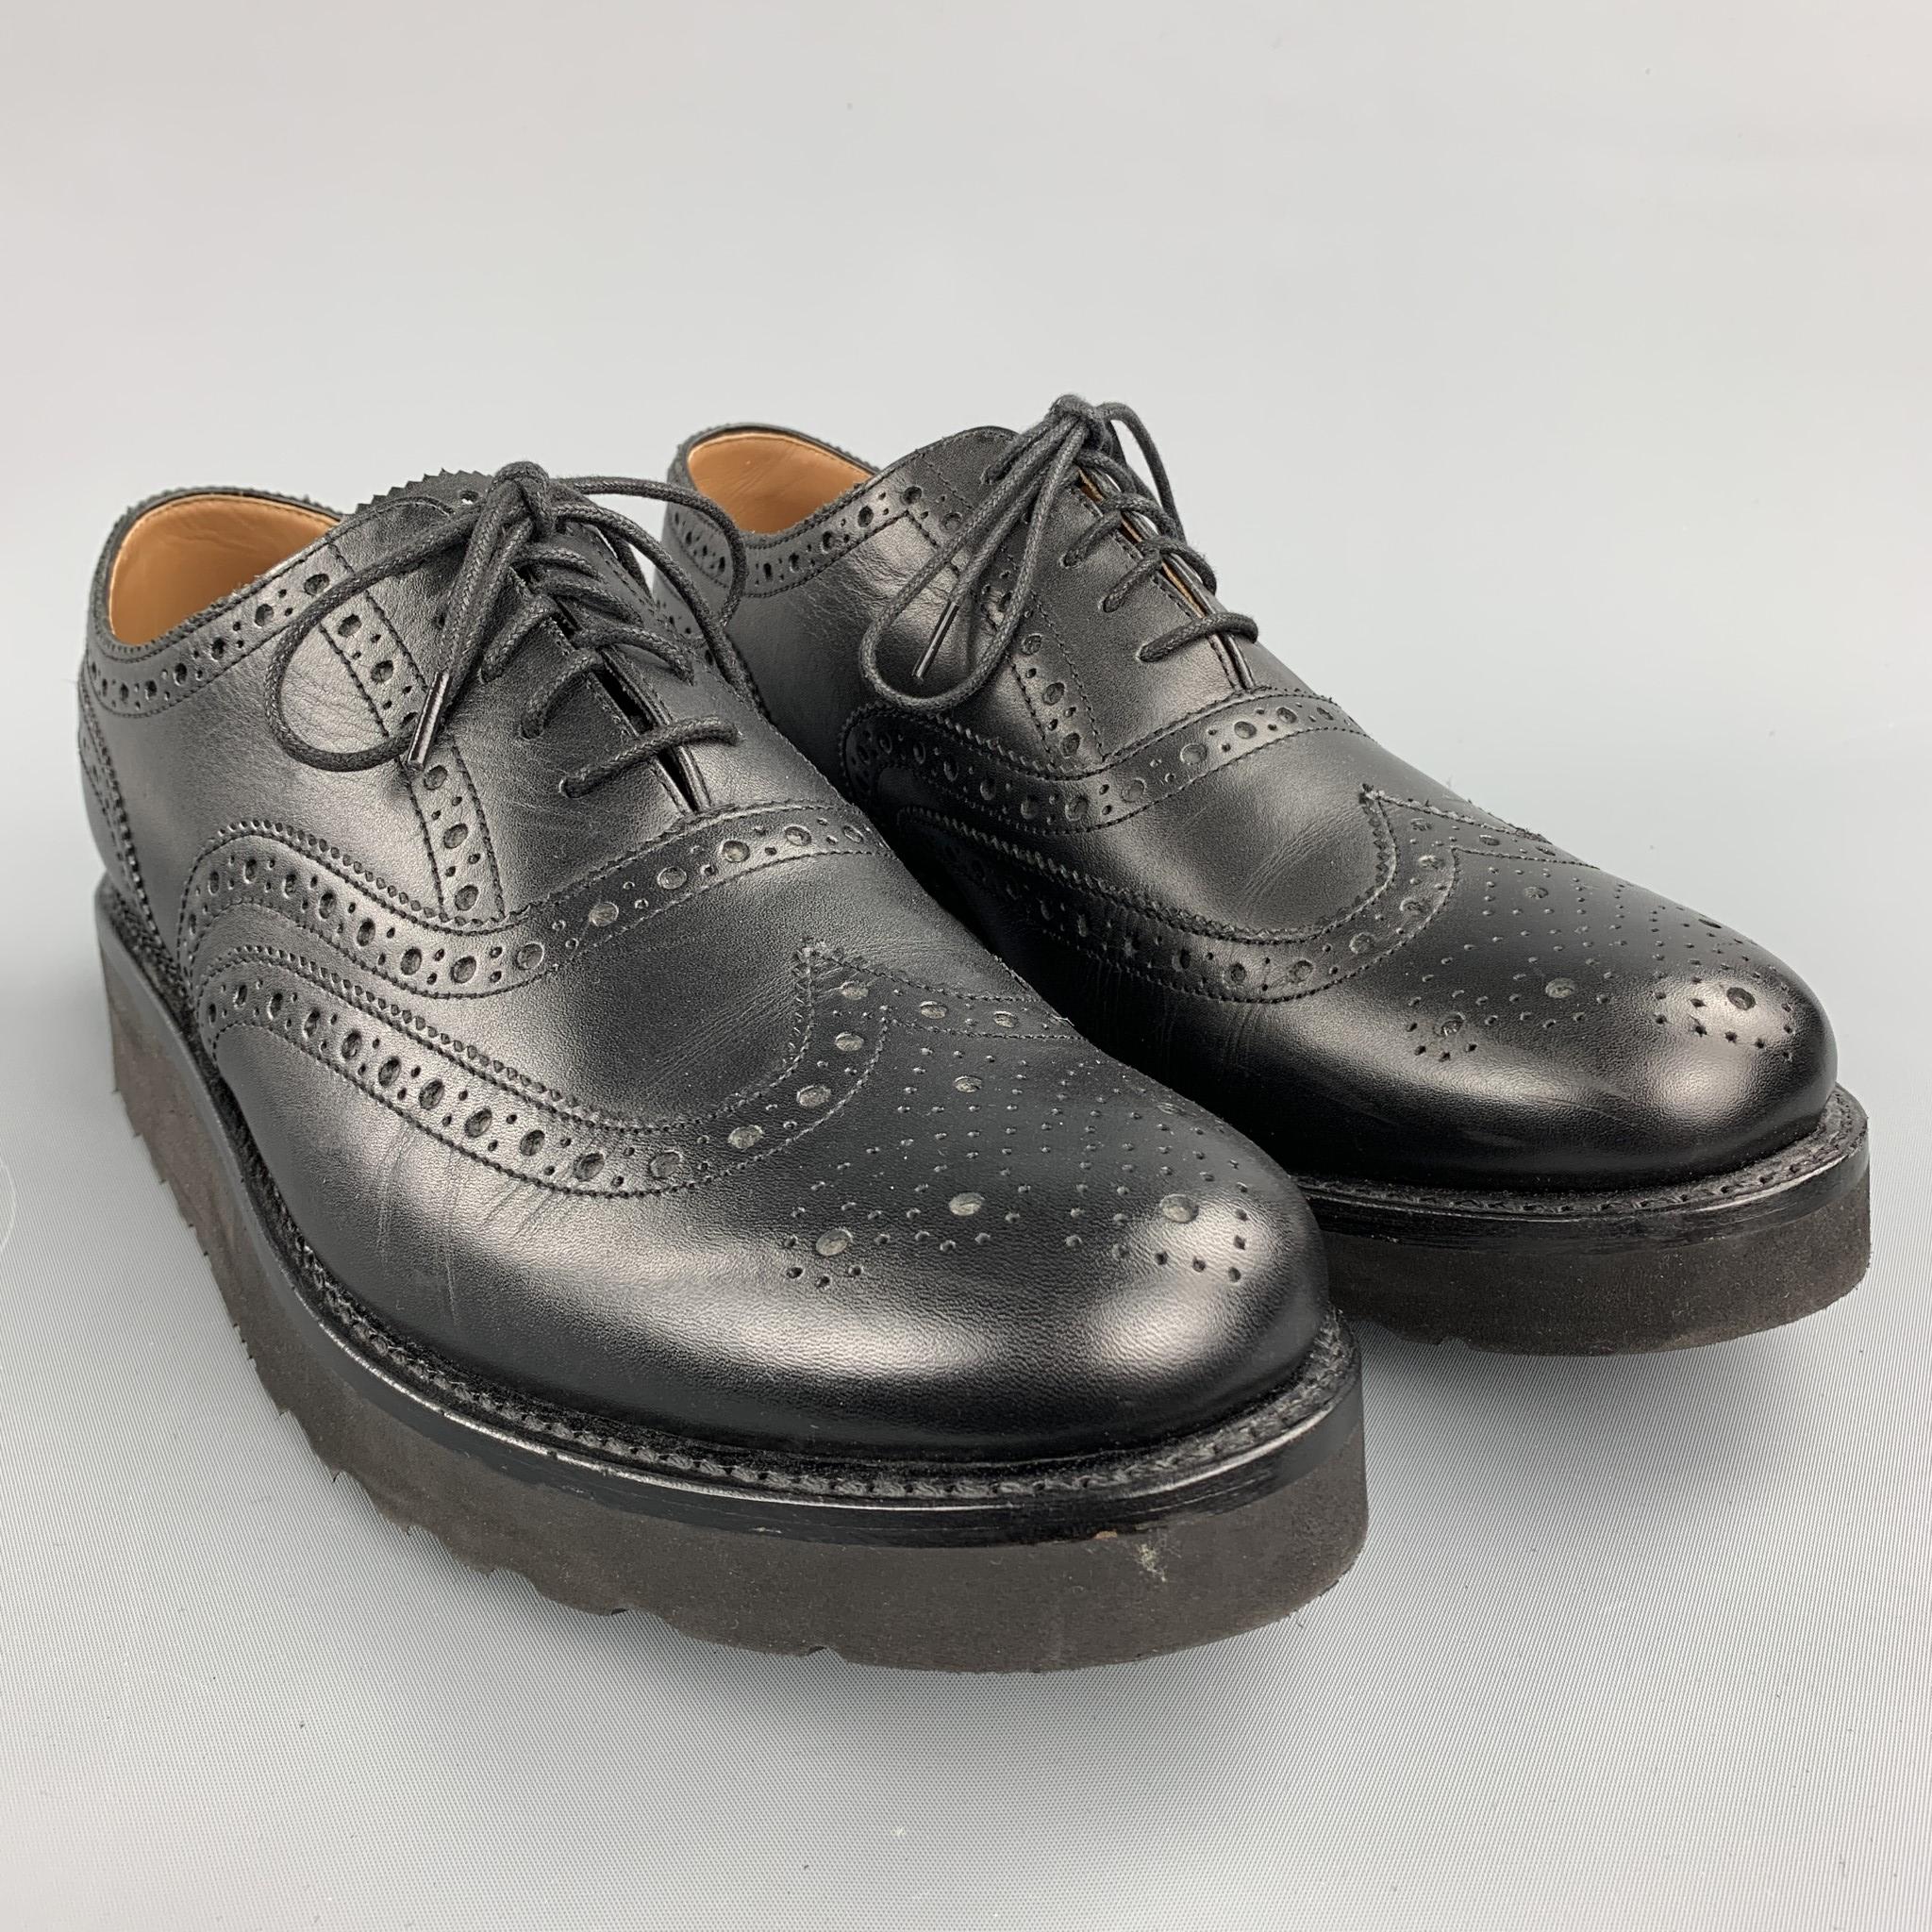 GRENSON lace up shoes comes in a black perforated leather featuring a wingtip, extra light style, and a rubber sole.

Excellent Pre-Owned Condition.
Marked: 10 G 

Outsole:

12.25 in. x 4.5 in. 